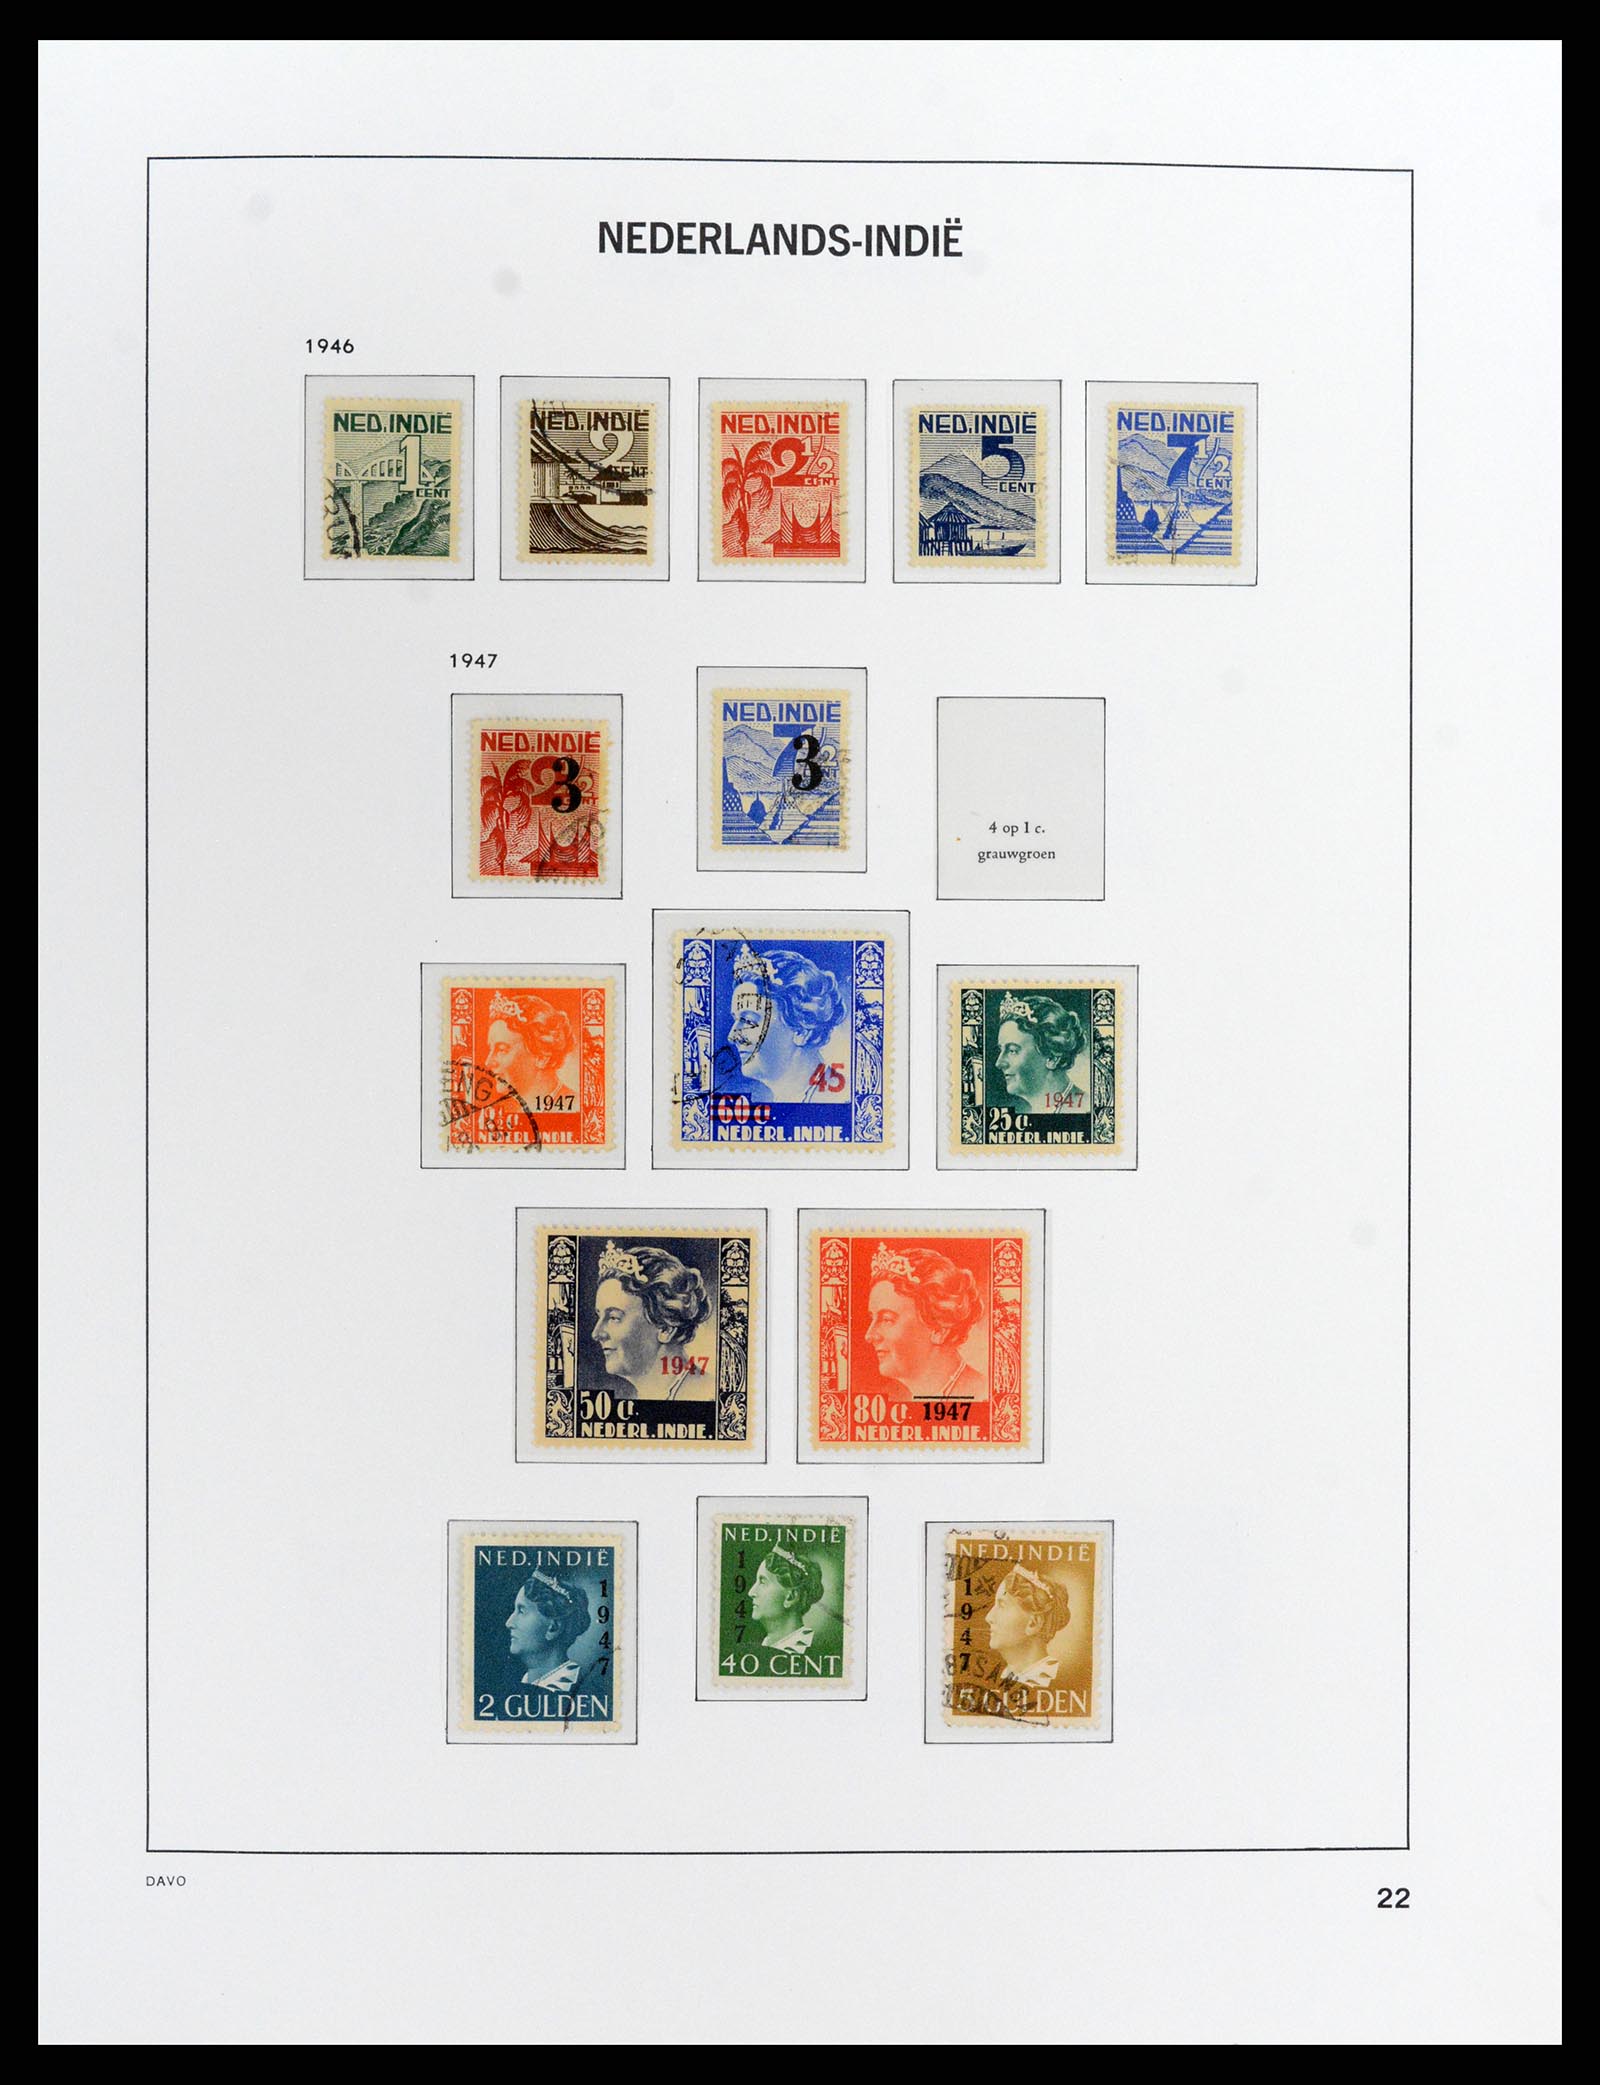 37912 022 - Stamp Collection 37912 Dutch east Indies 1870-1948.